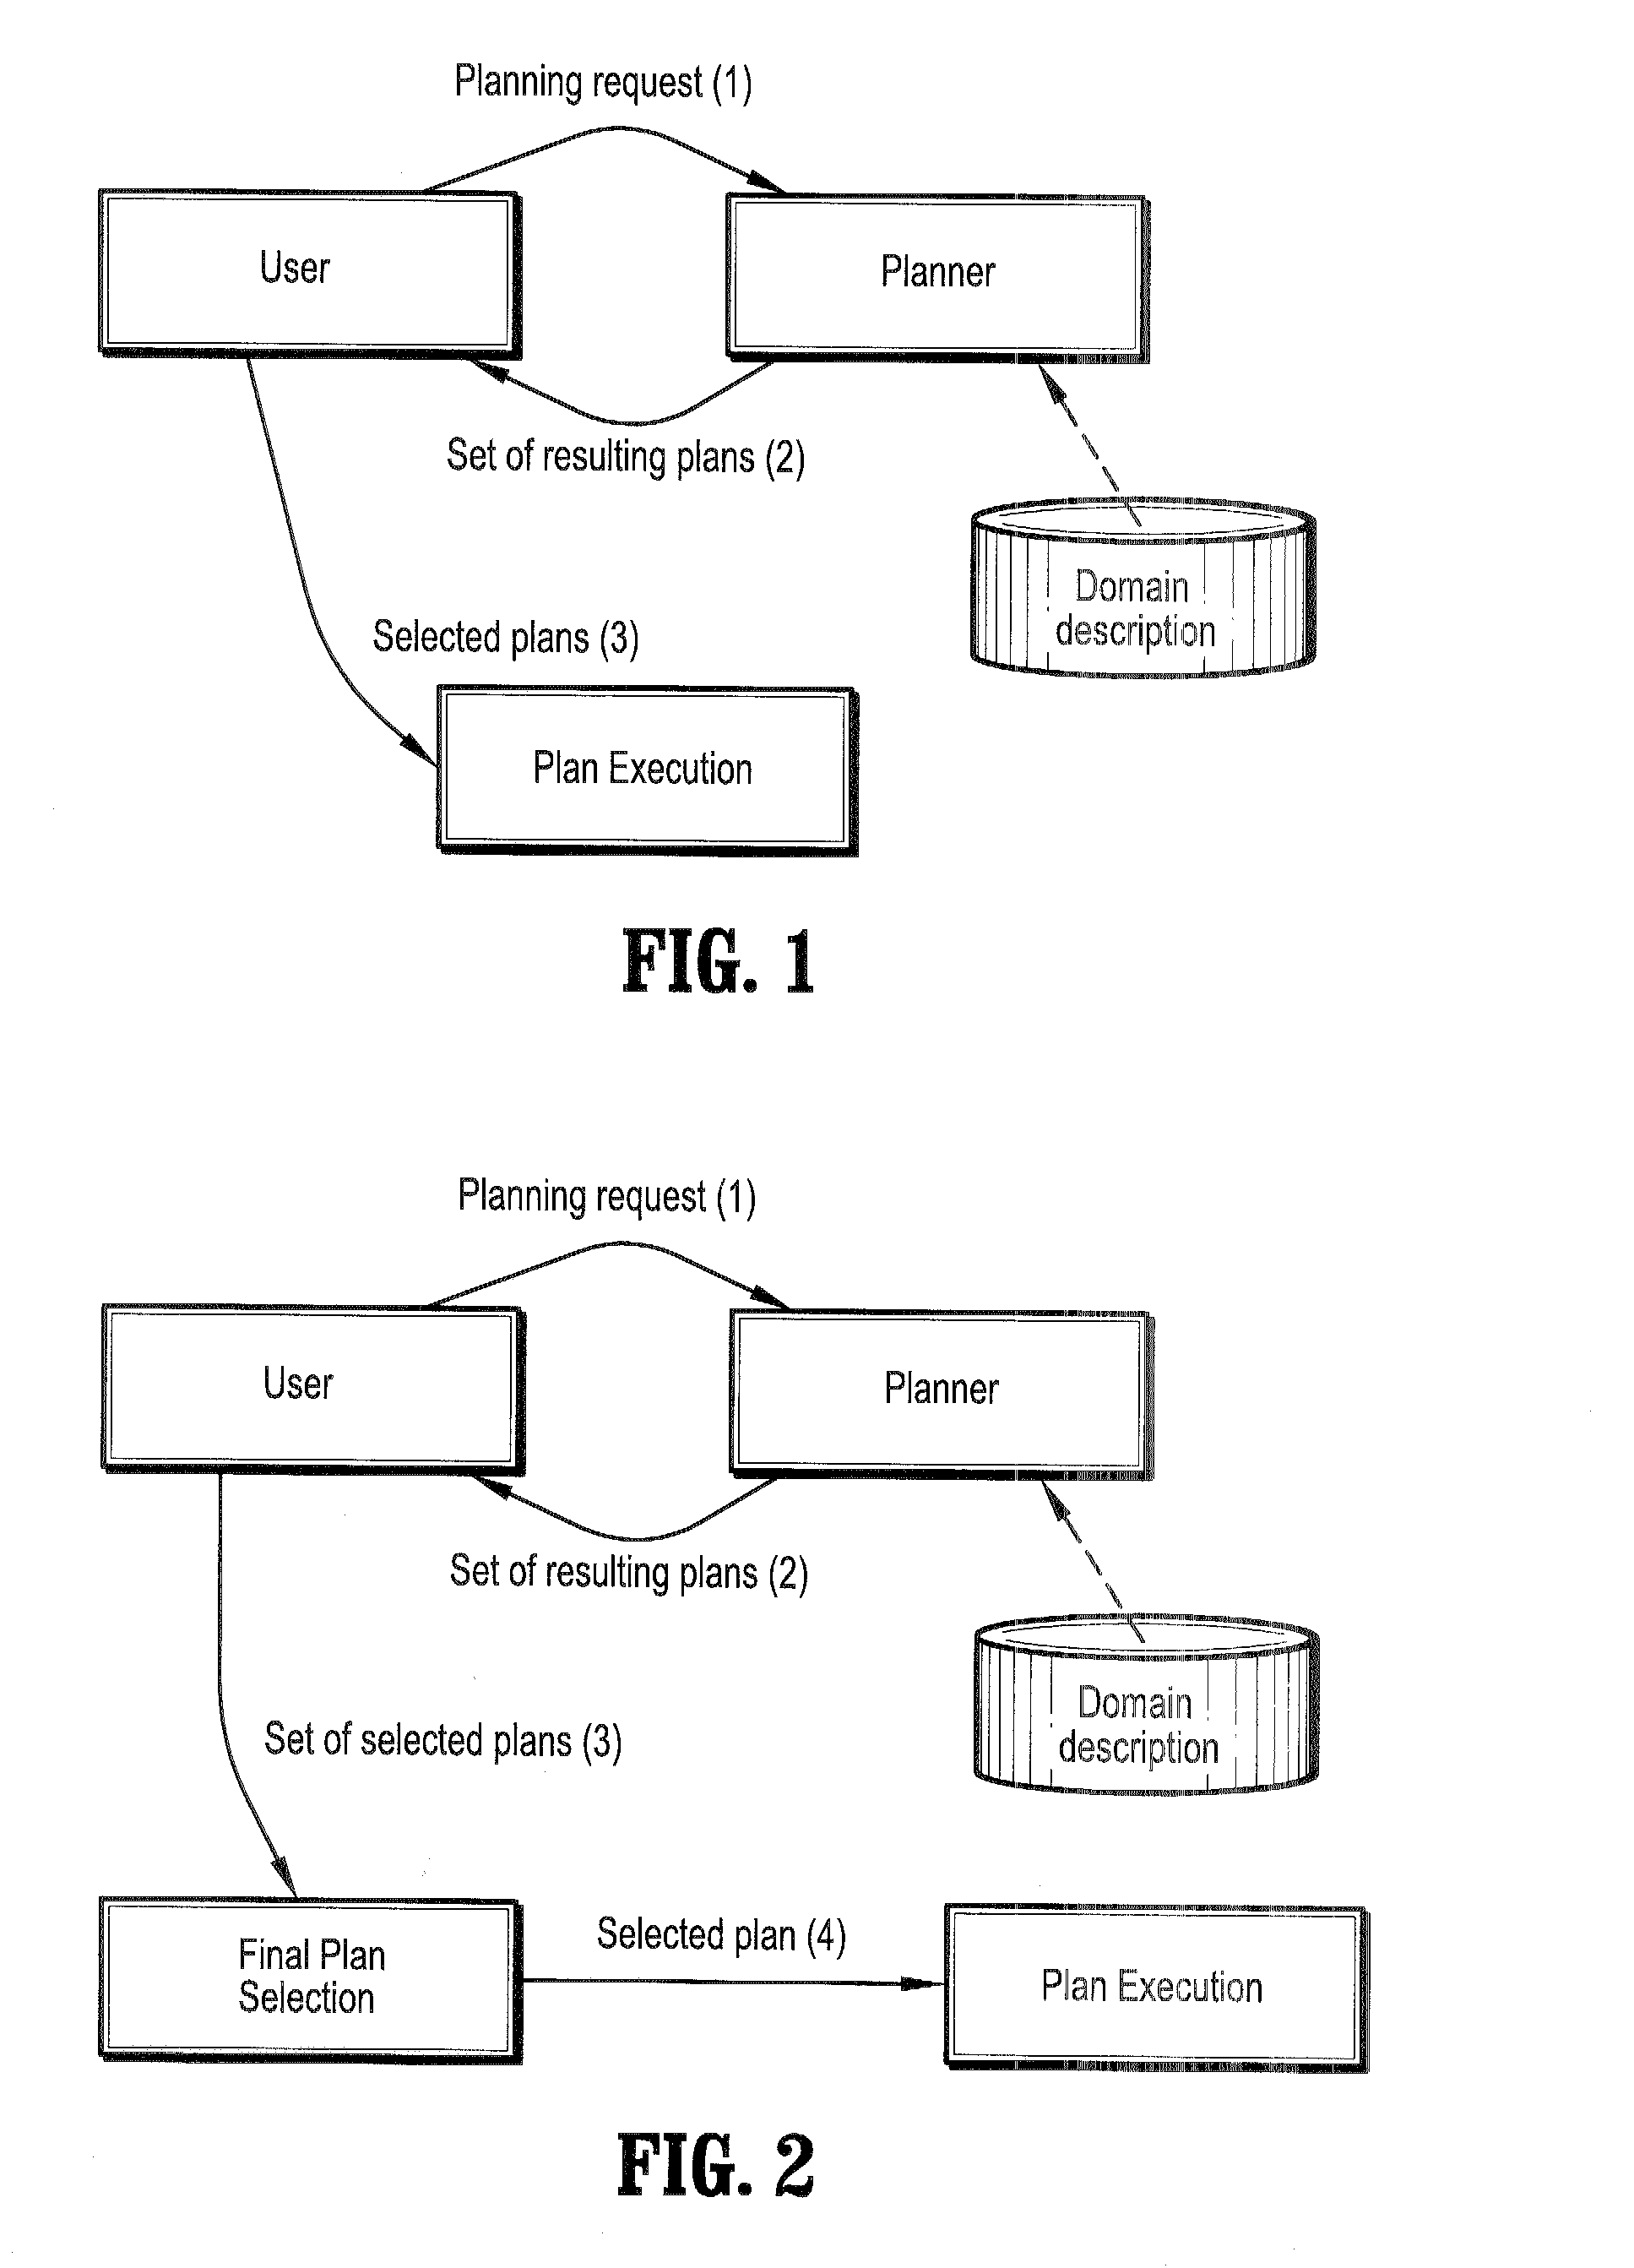 Apparatus and method of planning through generation of multiple efficient plans